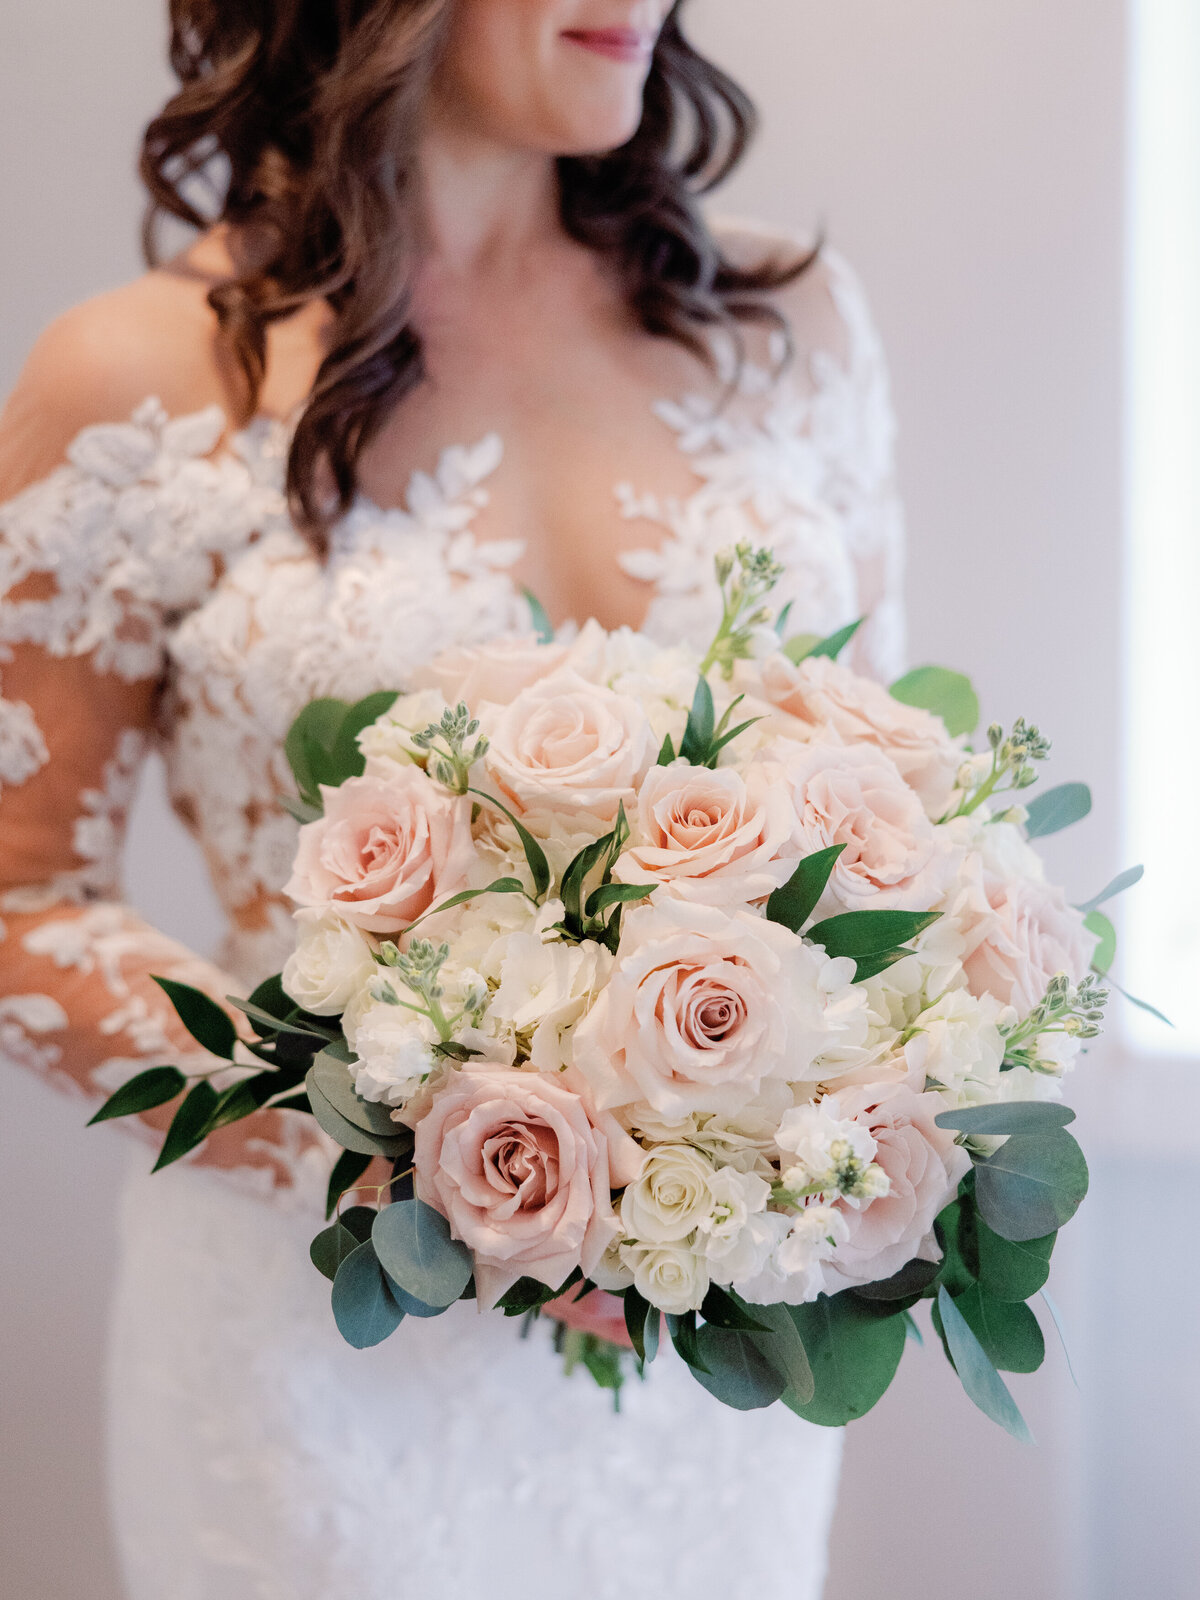 A closeup of the bride holding her bouquet of blush pink and white florals